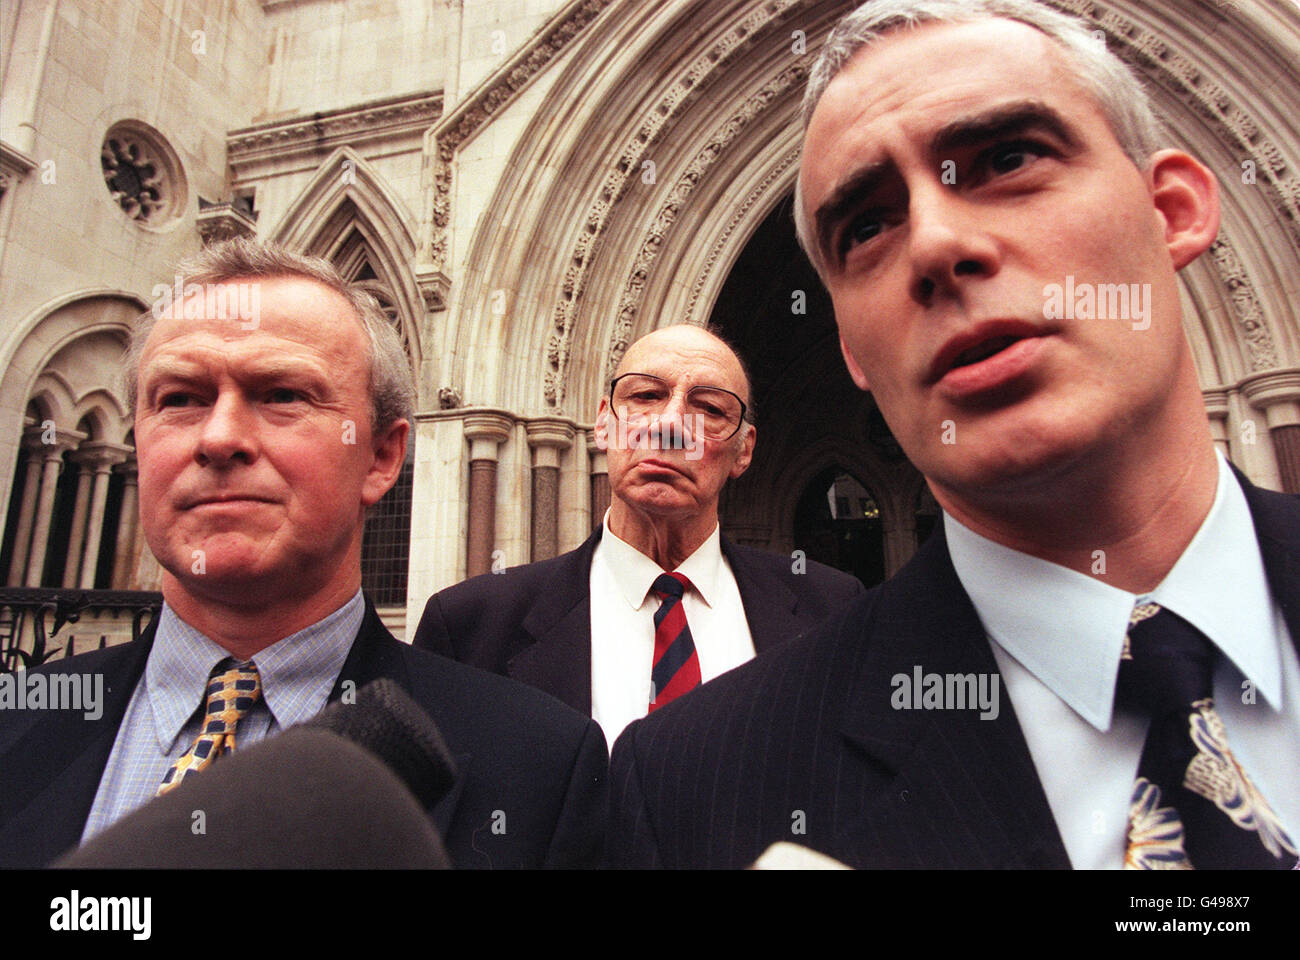 Anti-smoking campaigner Ernest Jones, who has been treated for lung cancer, is flanked by solicitors Martin Day and John Pickering (right) outside the High Court in London today (Thursday), where legal teams representing 43 cancer victims seeking compensation from tobacco companies were reassured by senior judges they will not be liable for huge legal costs if they lose. See PA story COURTS Smoking. Photo by Peter Jordan/PA Stock Photo